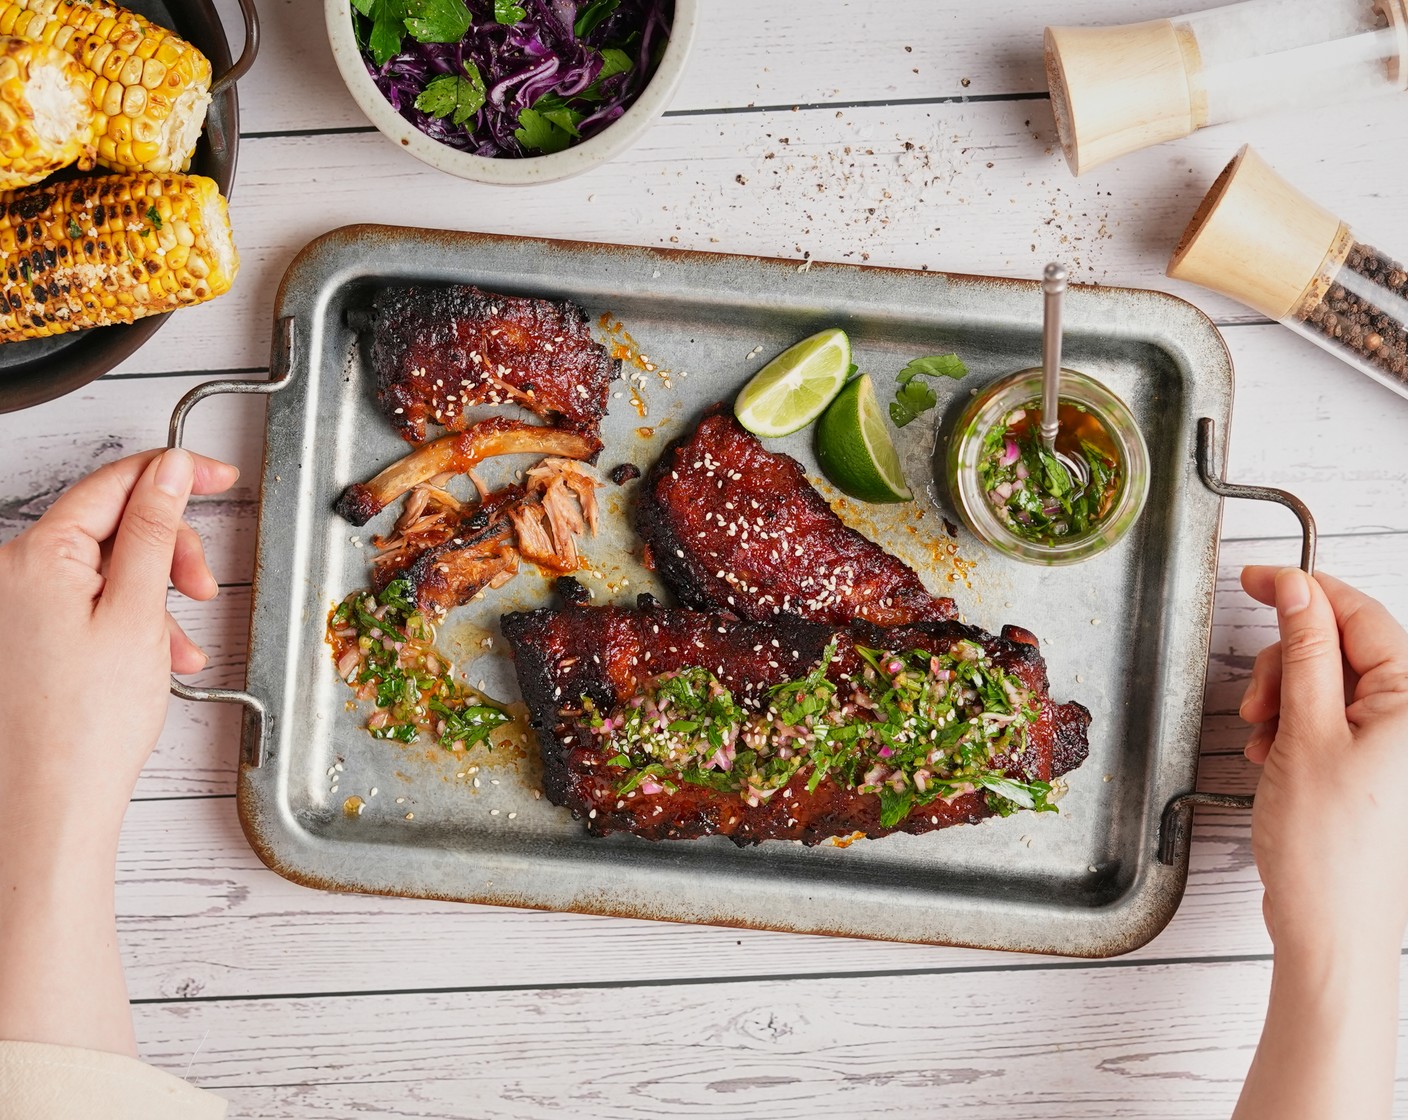 Korean-Inspired Ribs with a Twist of Chimichurri